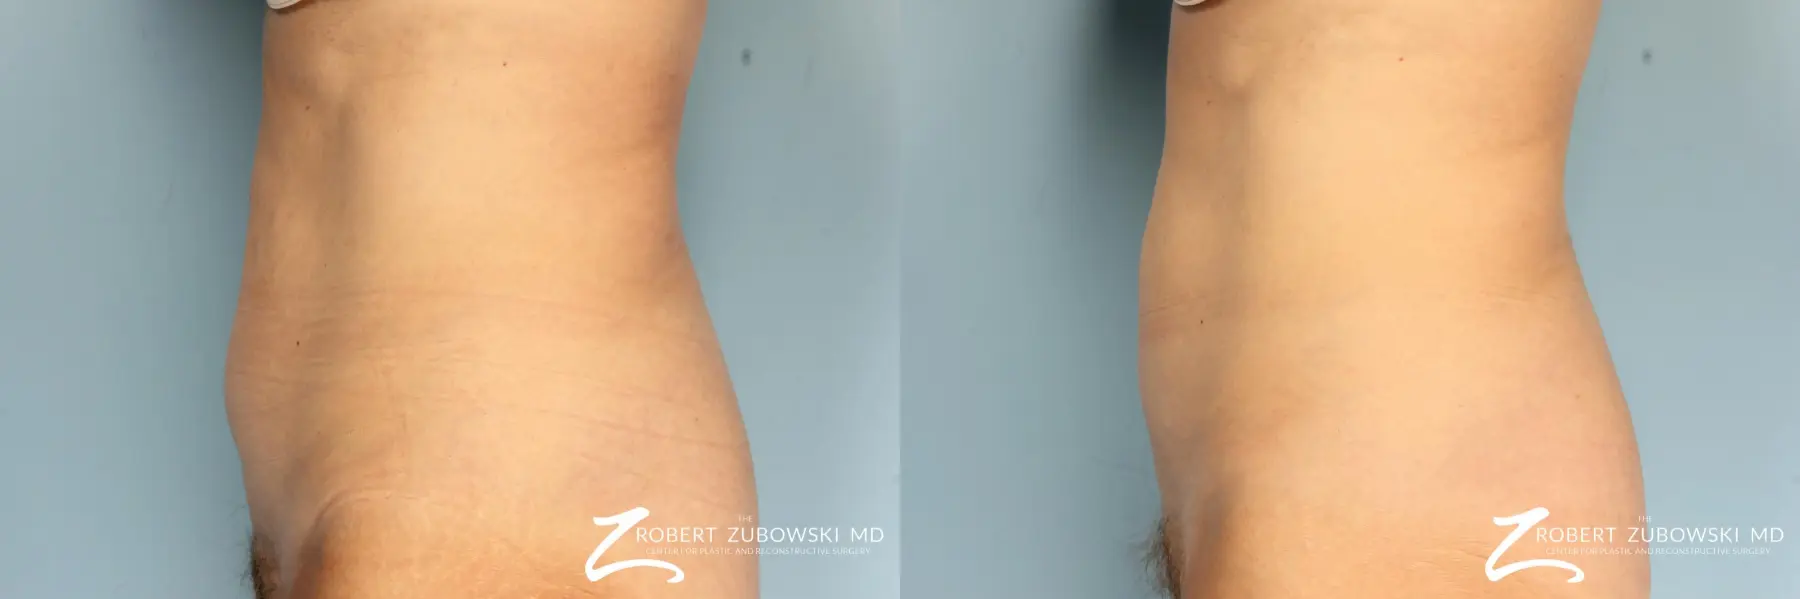 CoolSculpting®: Patient 3 - Before and After 2